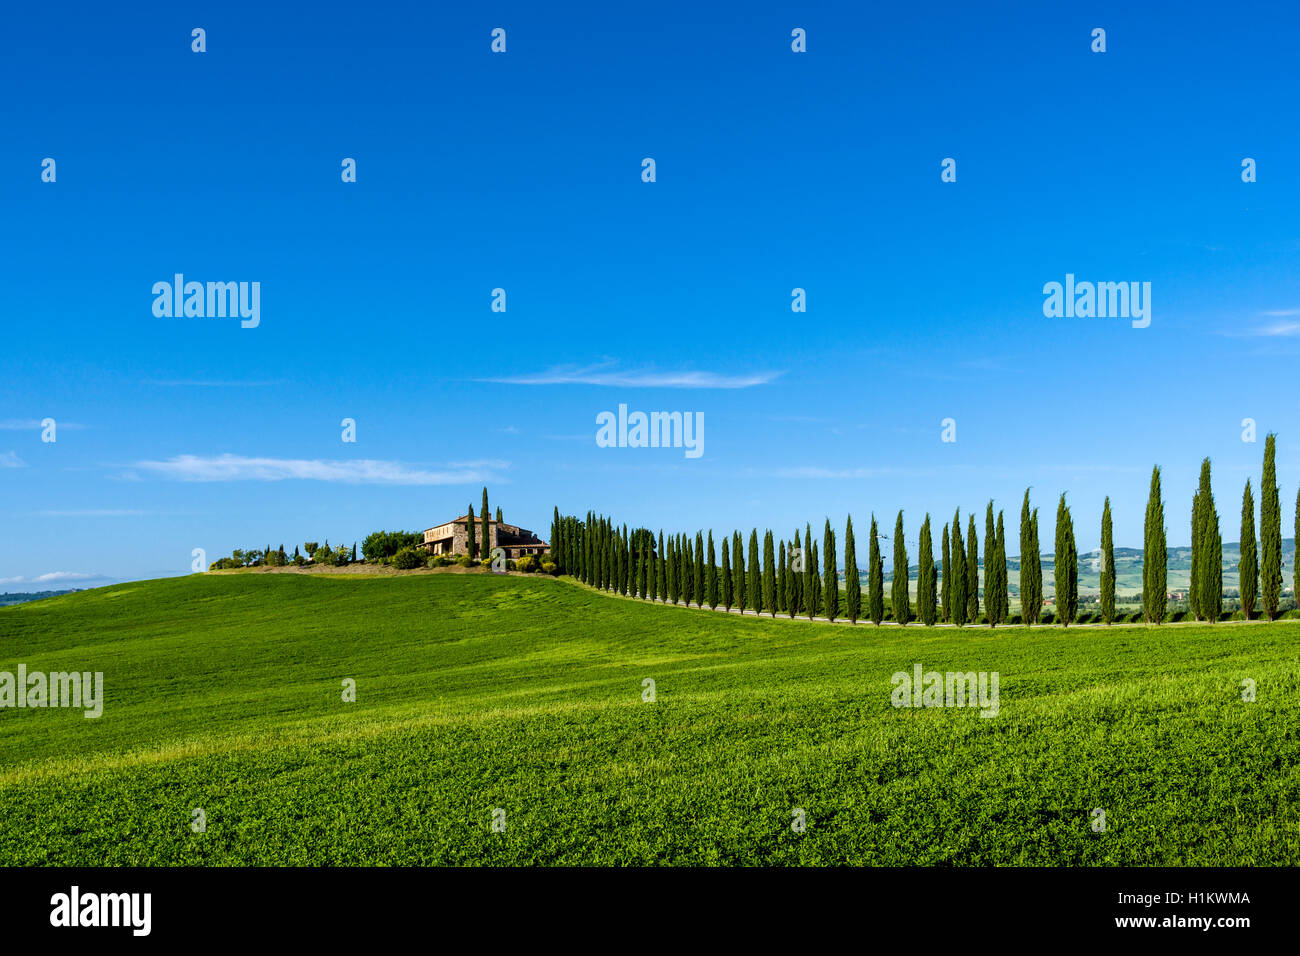 Typical green Tuscan landscape in Bagno Vignoni, Val d’Orcia, farm on hill, fields, cypresses and blue sky Stock Photo